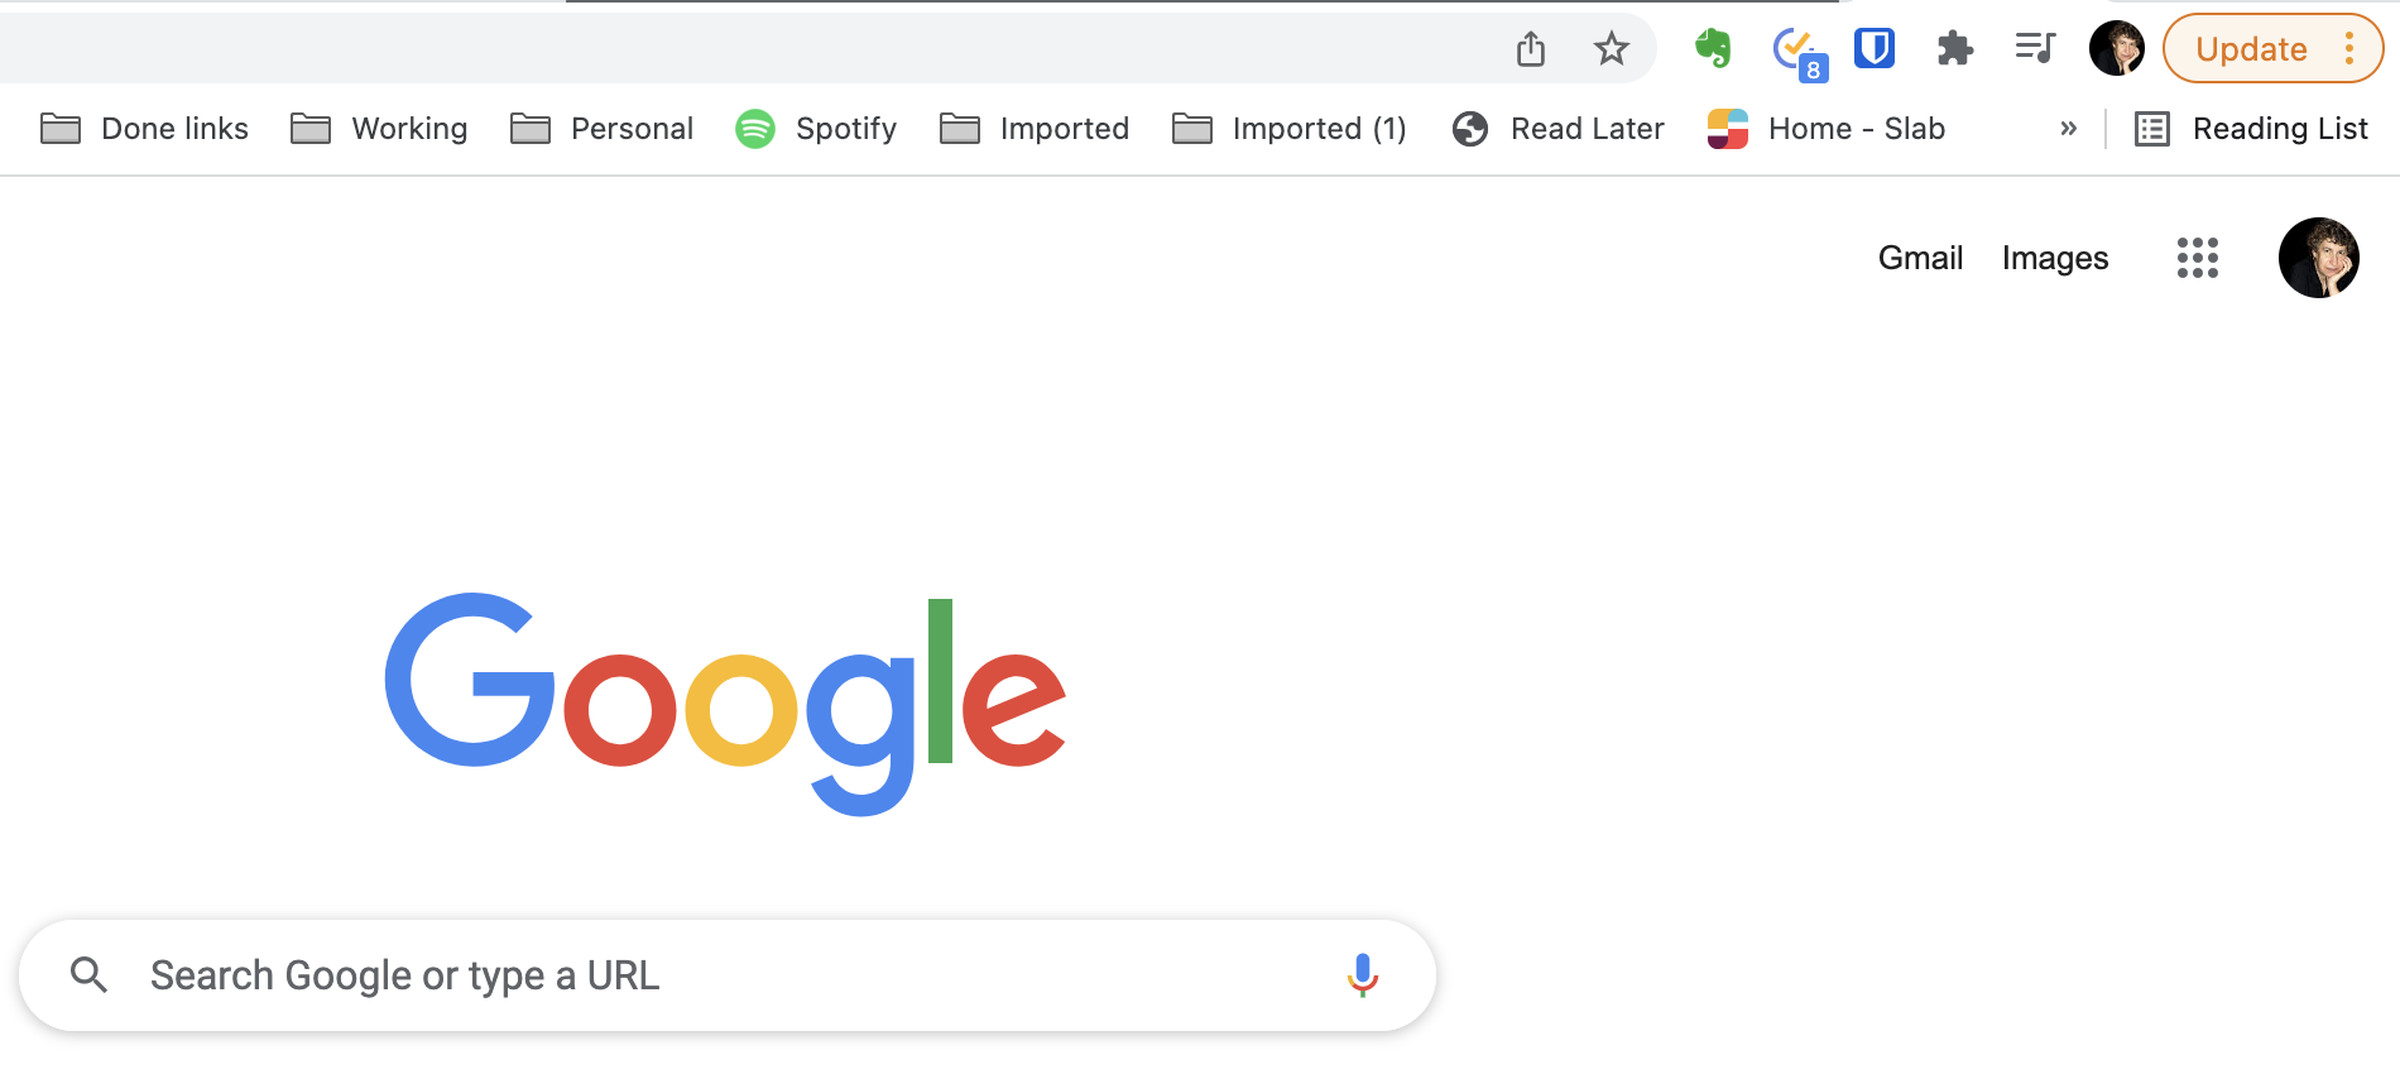 If it’s time to update, Chrome will let you know in the upper right corner.